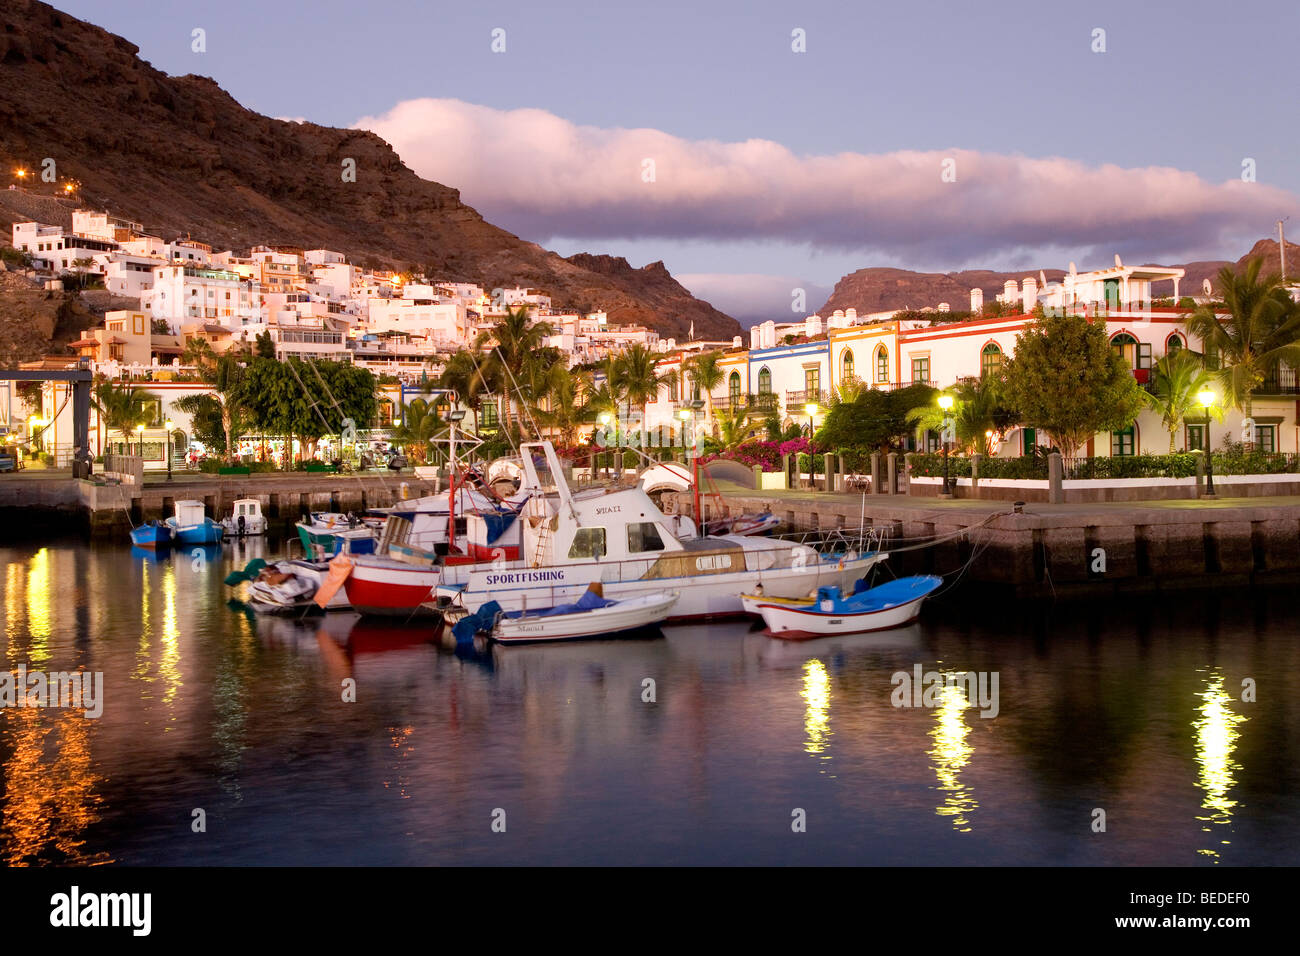 Puerto Mogan, the Venice of the Canary Islands, small port town with canals and many restaurants, Canary Islands, Spain, Europe Stock Photo